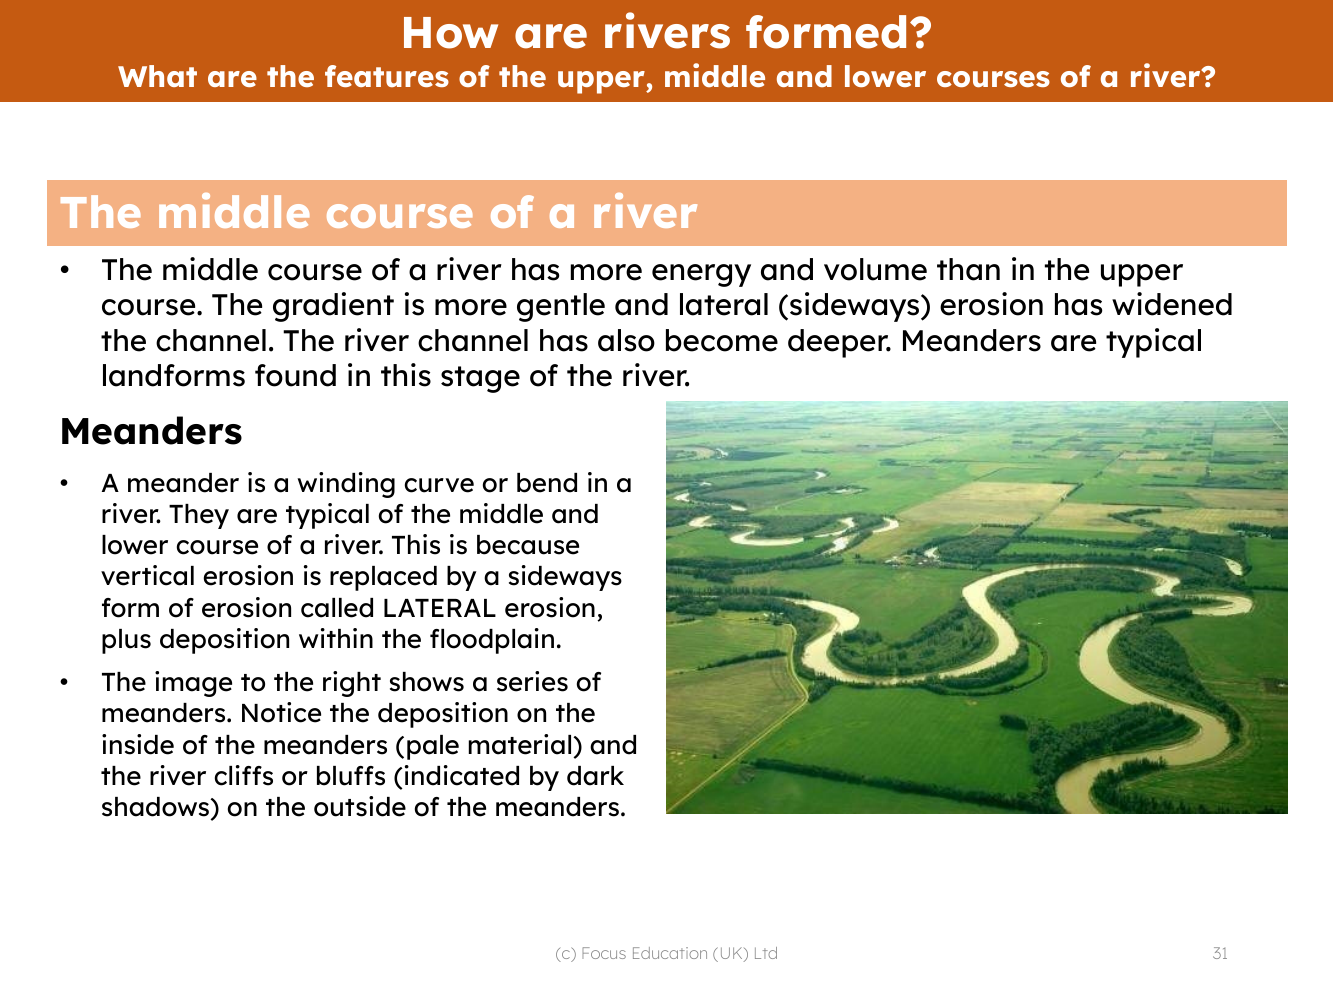 Middle course of a river - Info sheet